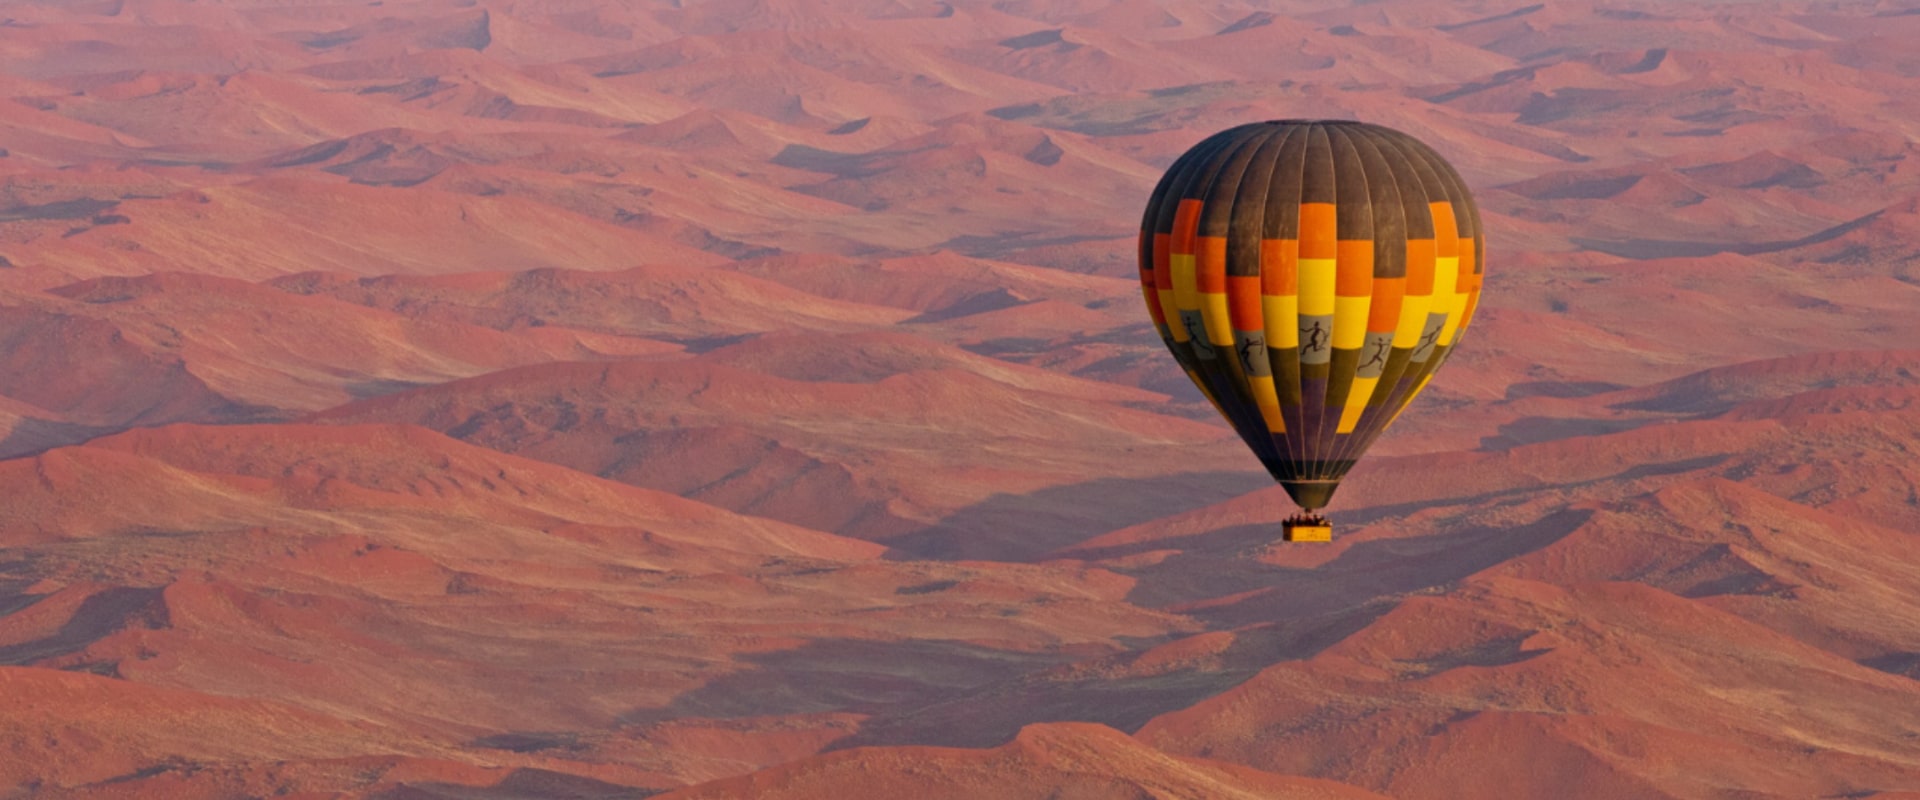 Drift over endless spans of orange dunes in a hot-air balloon